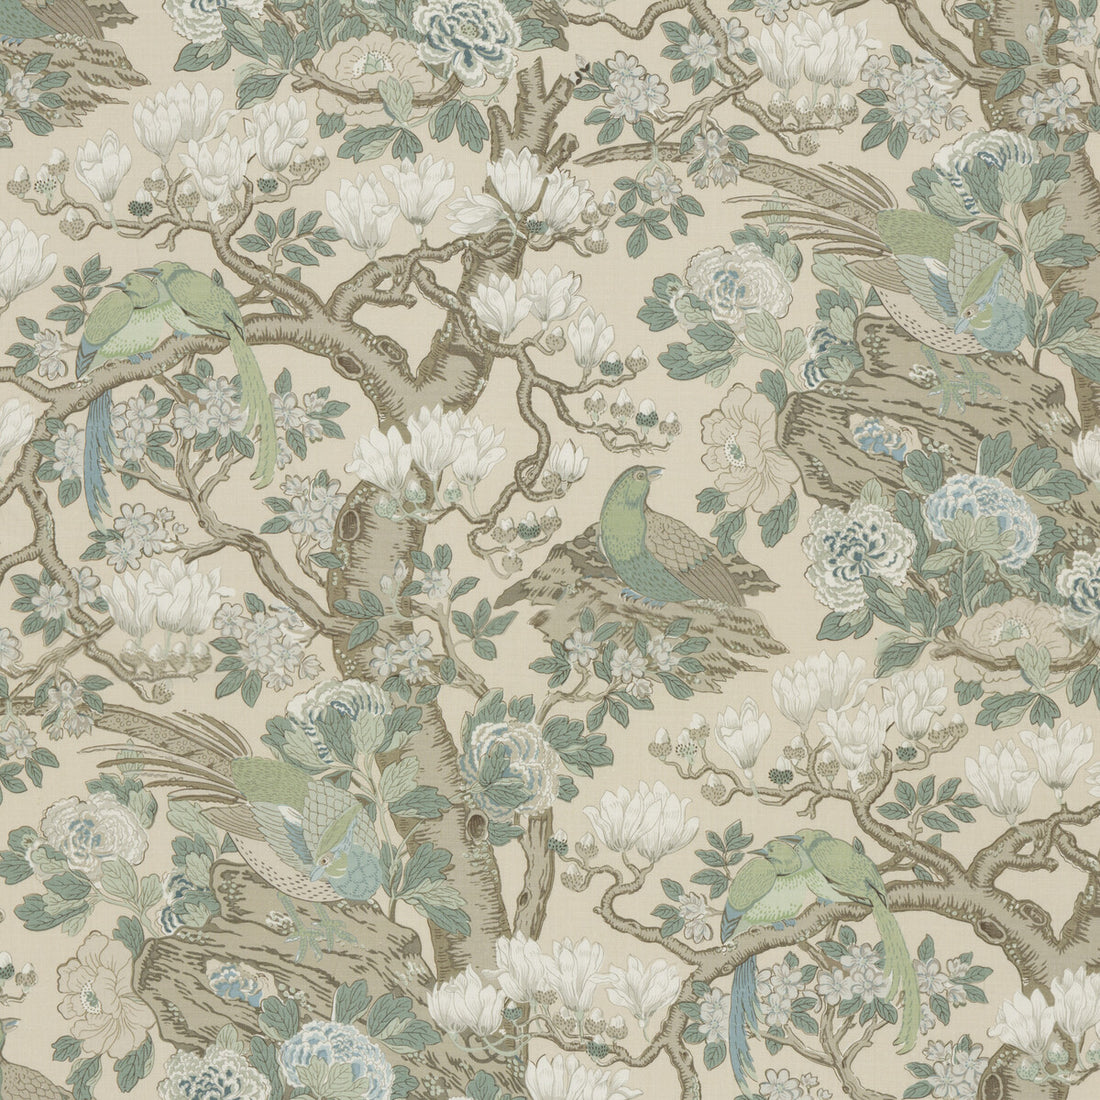 Rockbird Signature fabric in soft blue color - pattern BP10773.3.0 - by G P &amp; J Baker in the Signature Prints collection